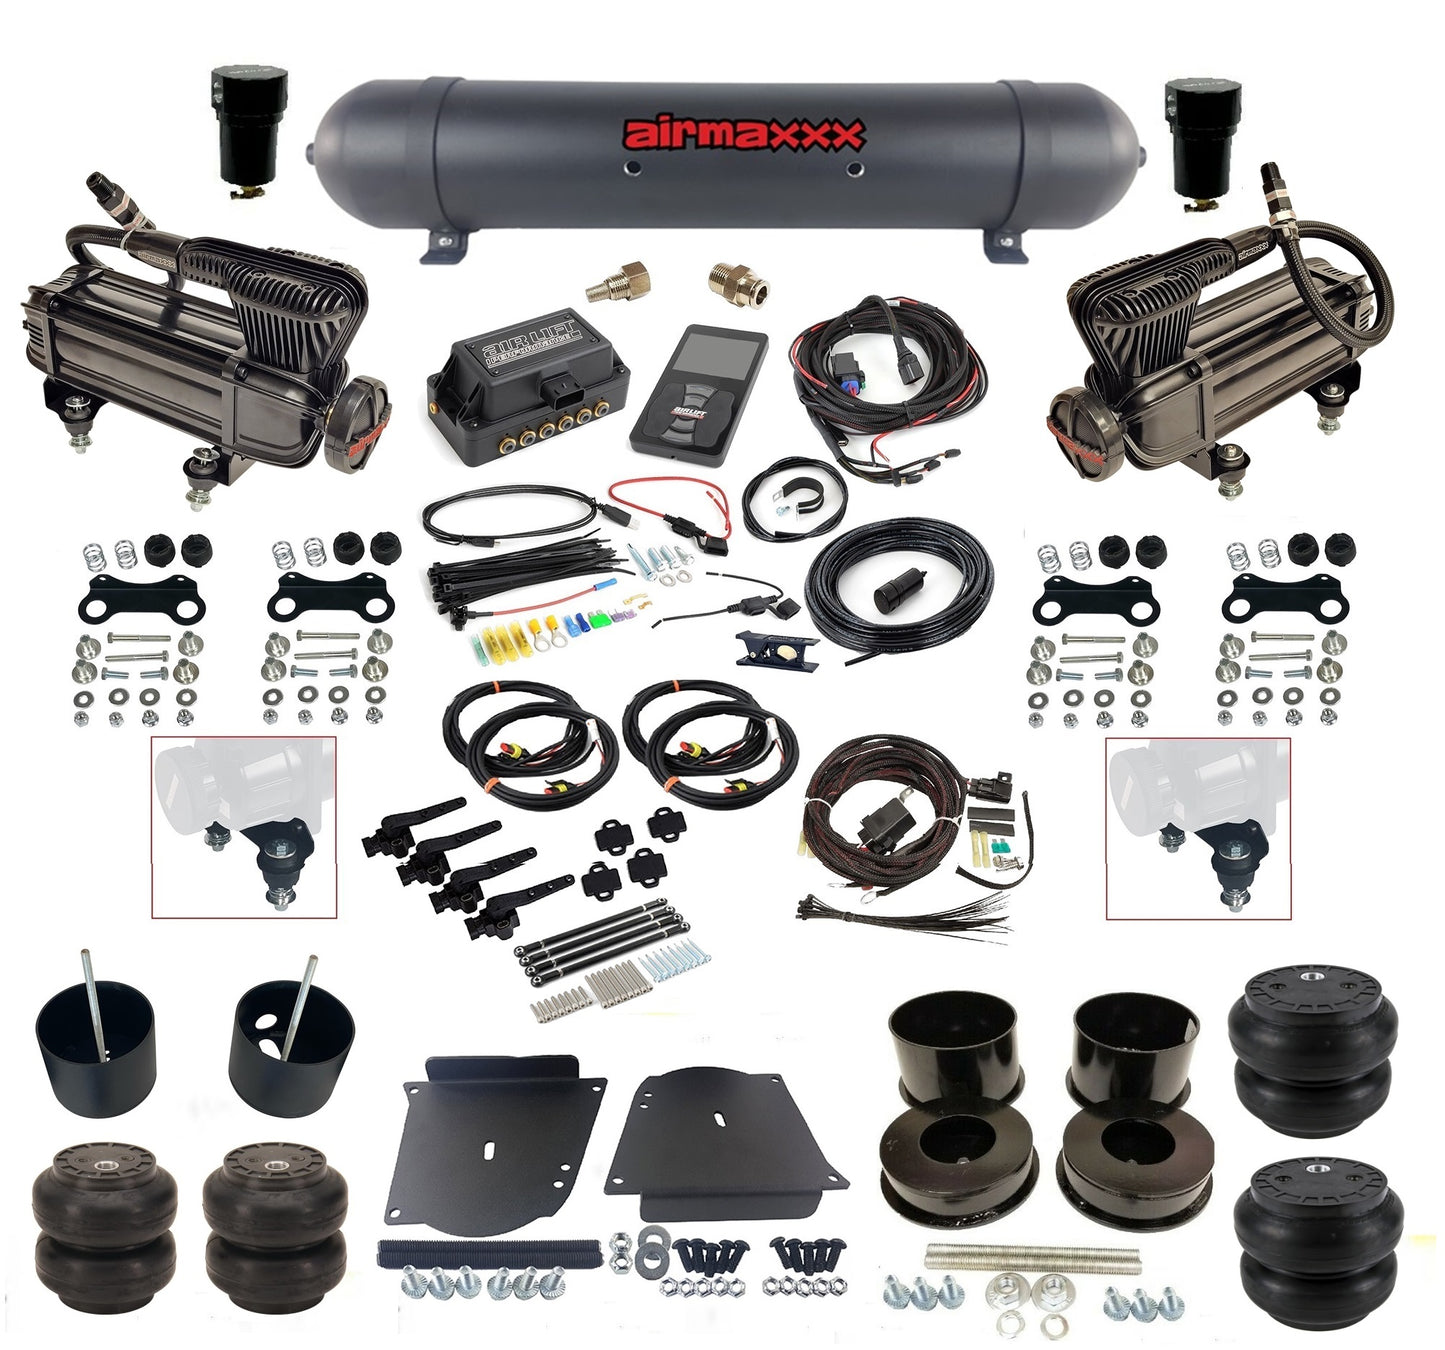 580 Black w/3H 27695 Air Lift 3/8" Height Presets Air Suspension Kit Fits 1964-72 GM A-Body